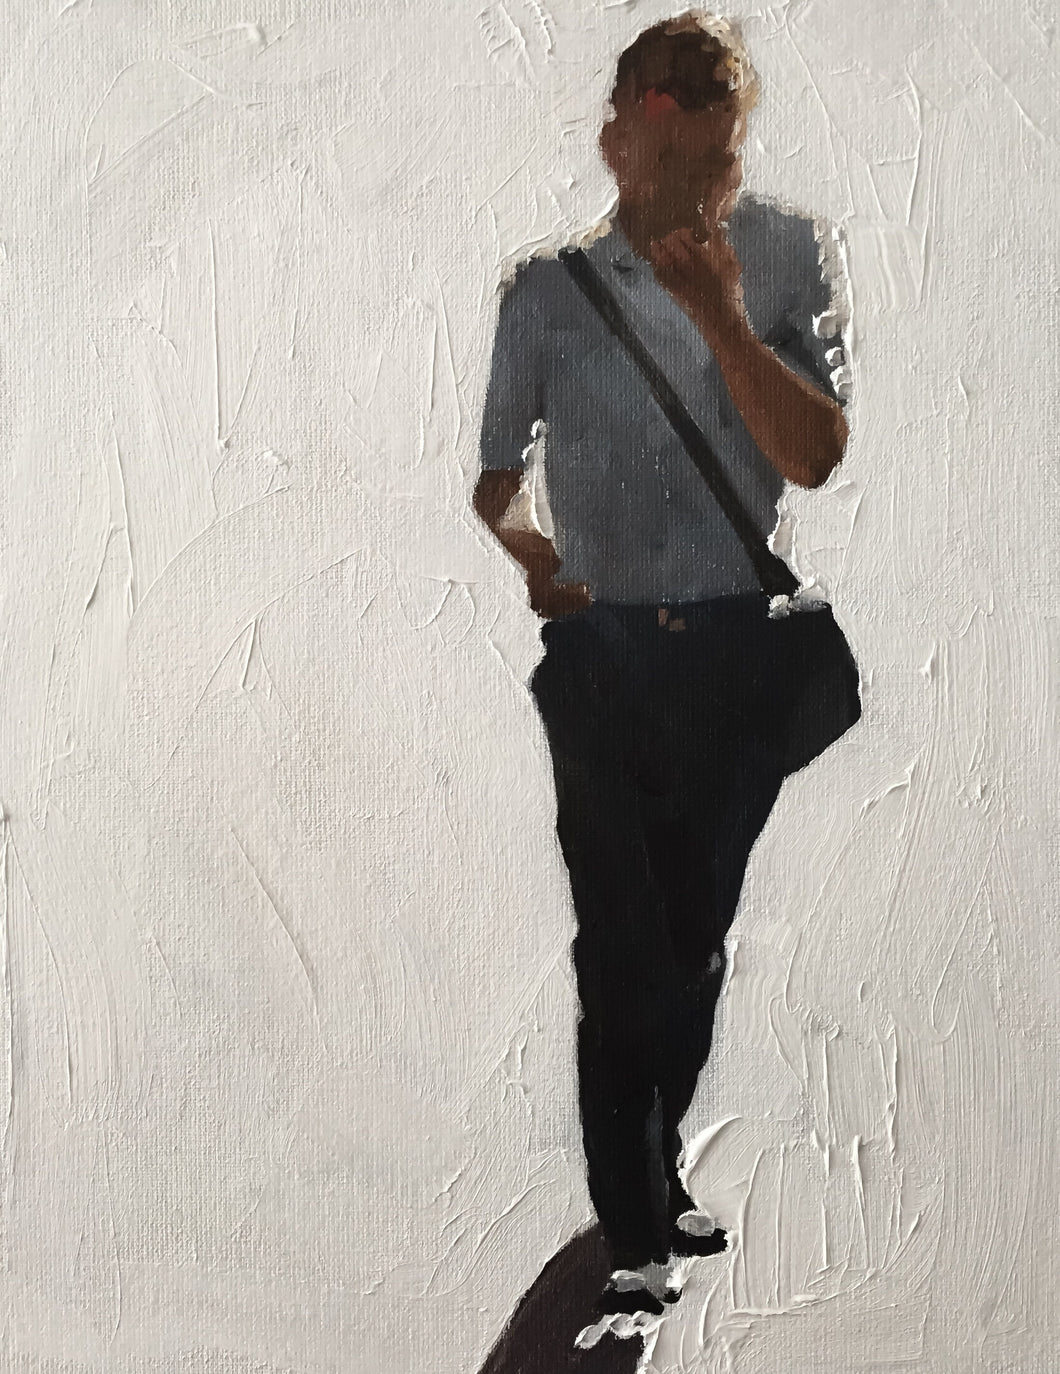 Man walking Painting, Poster, Wall art, Canvas Print - Fine Art - from original oil painting by James Coates